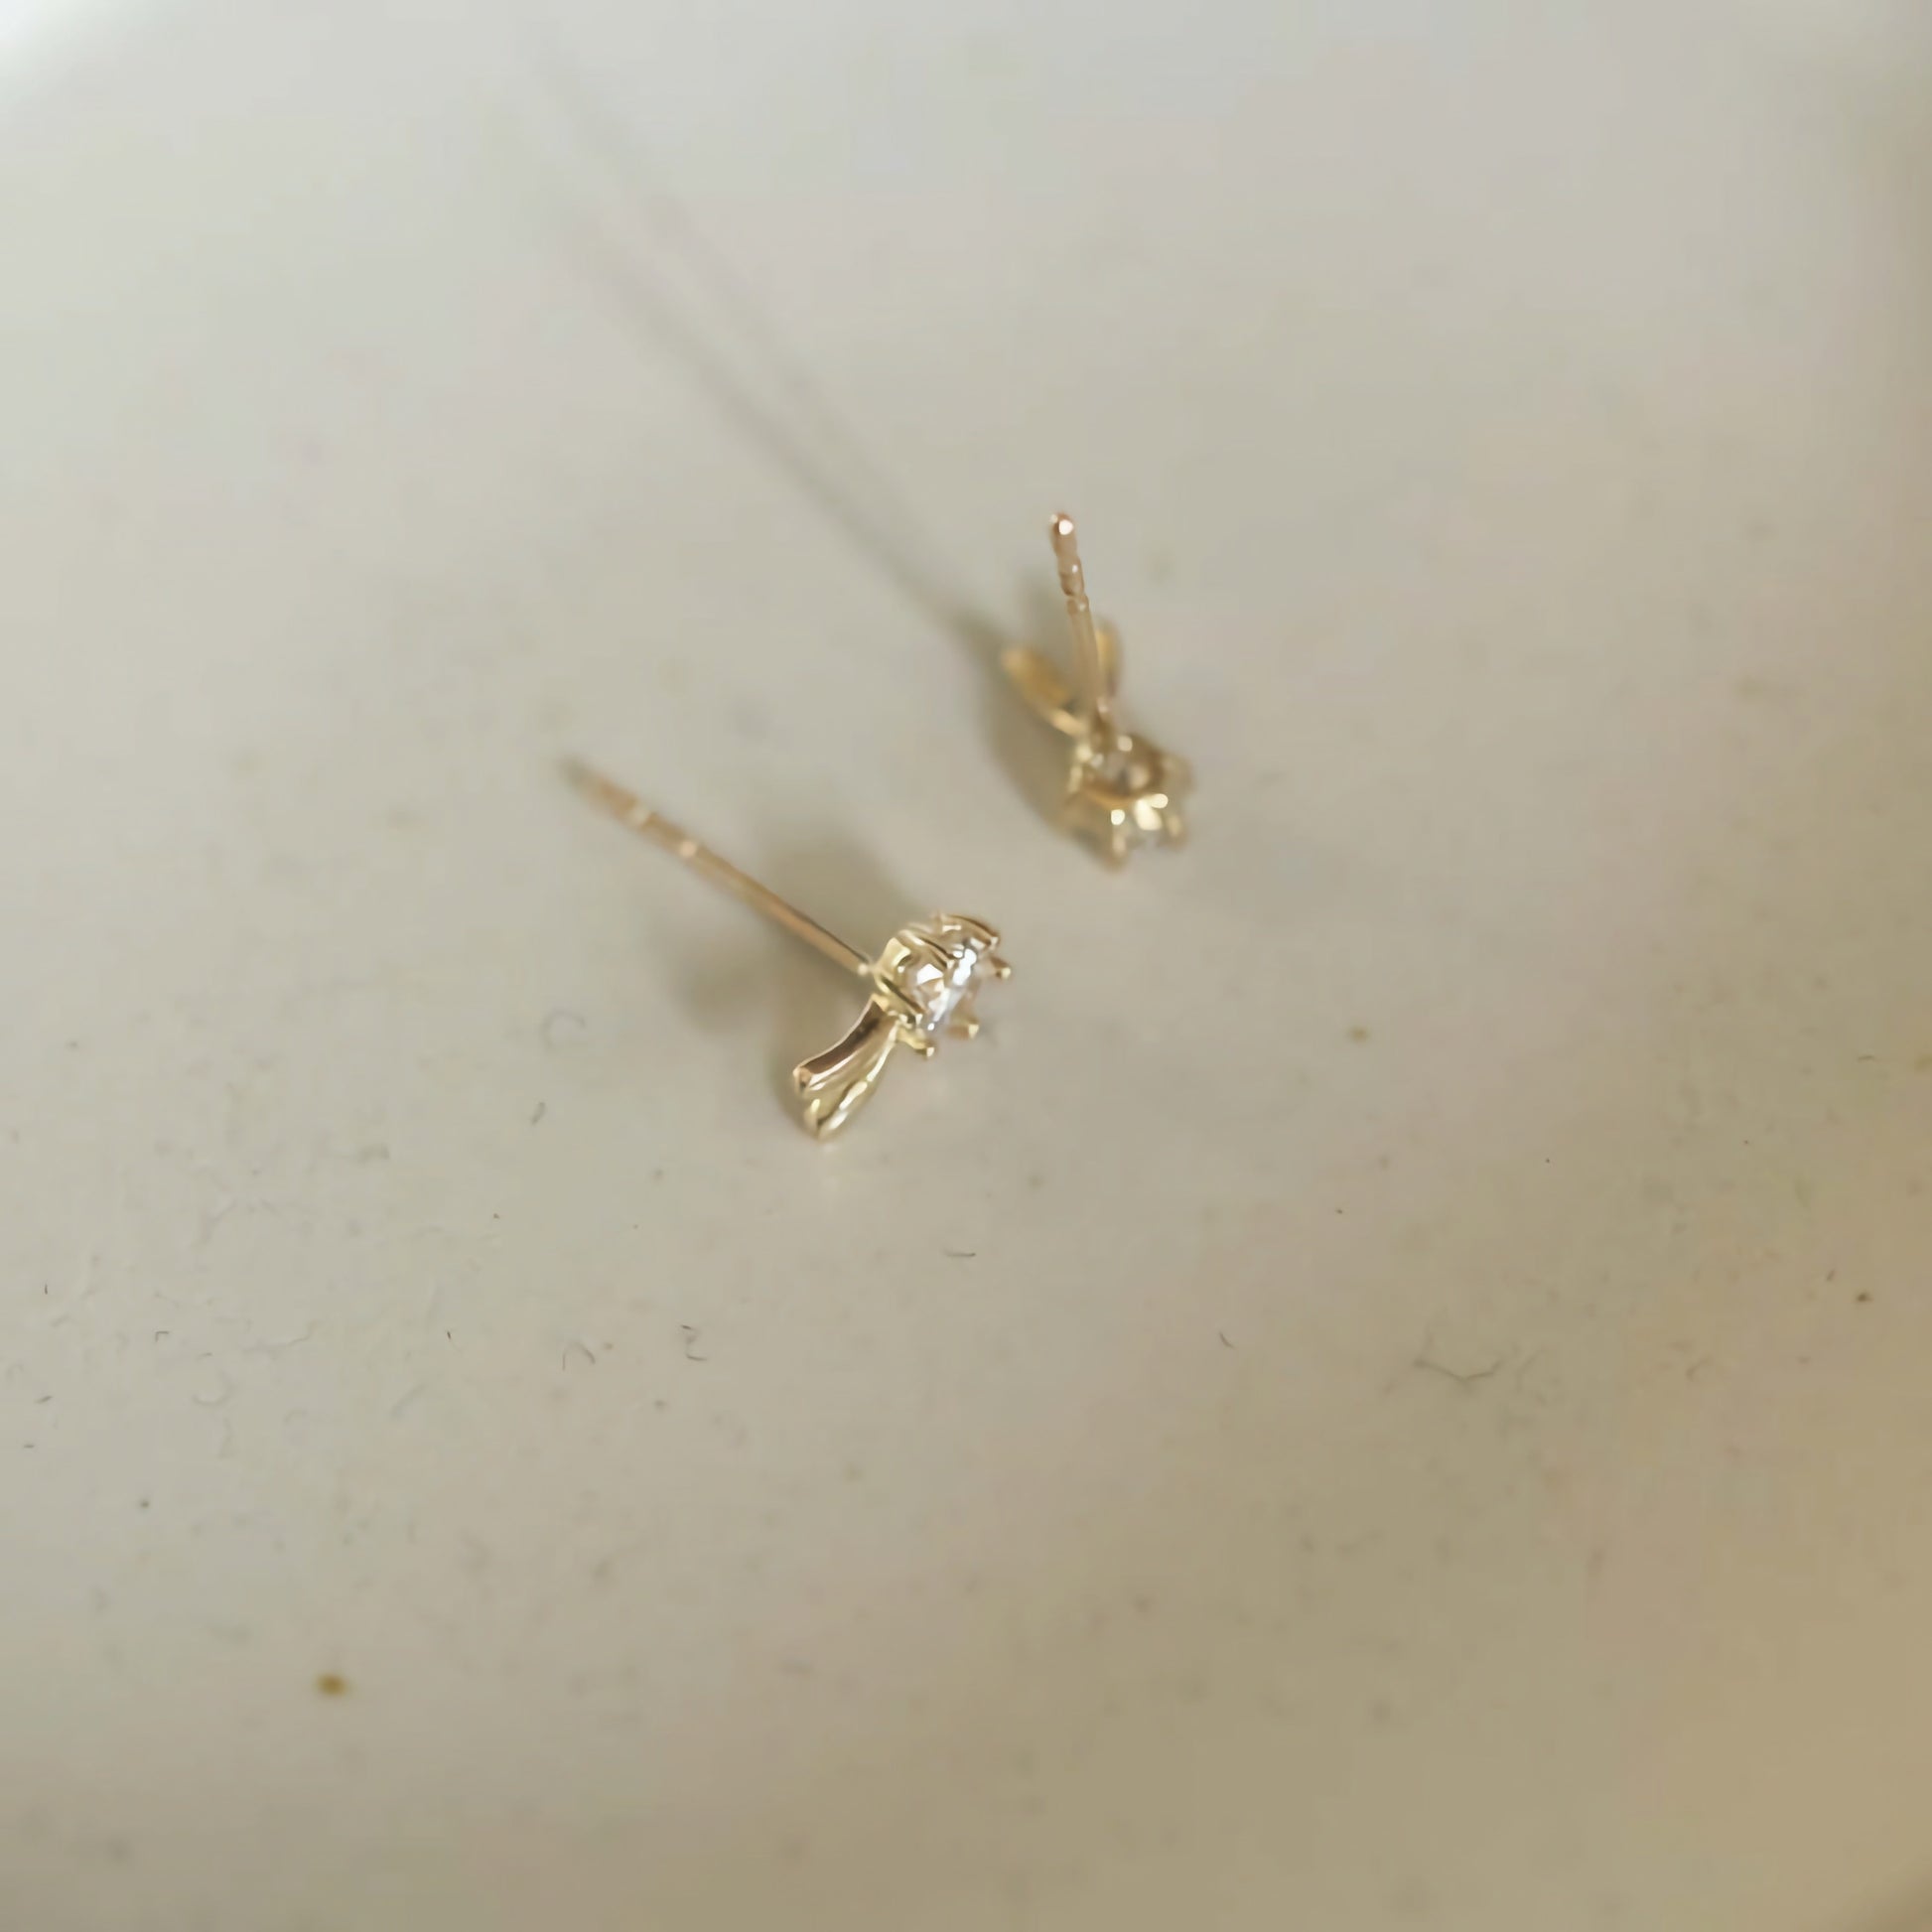 Handmade 9ct solid gold studs in the shape of playful bunny ears, an elegant yet quirky addition to any jewelry collection.